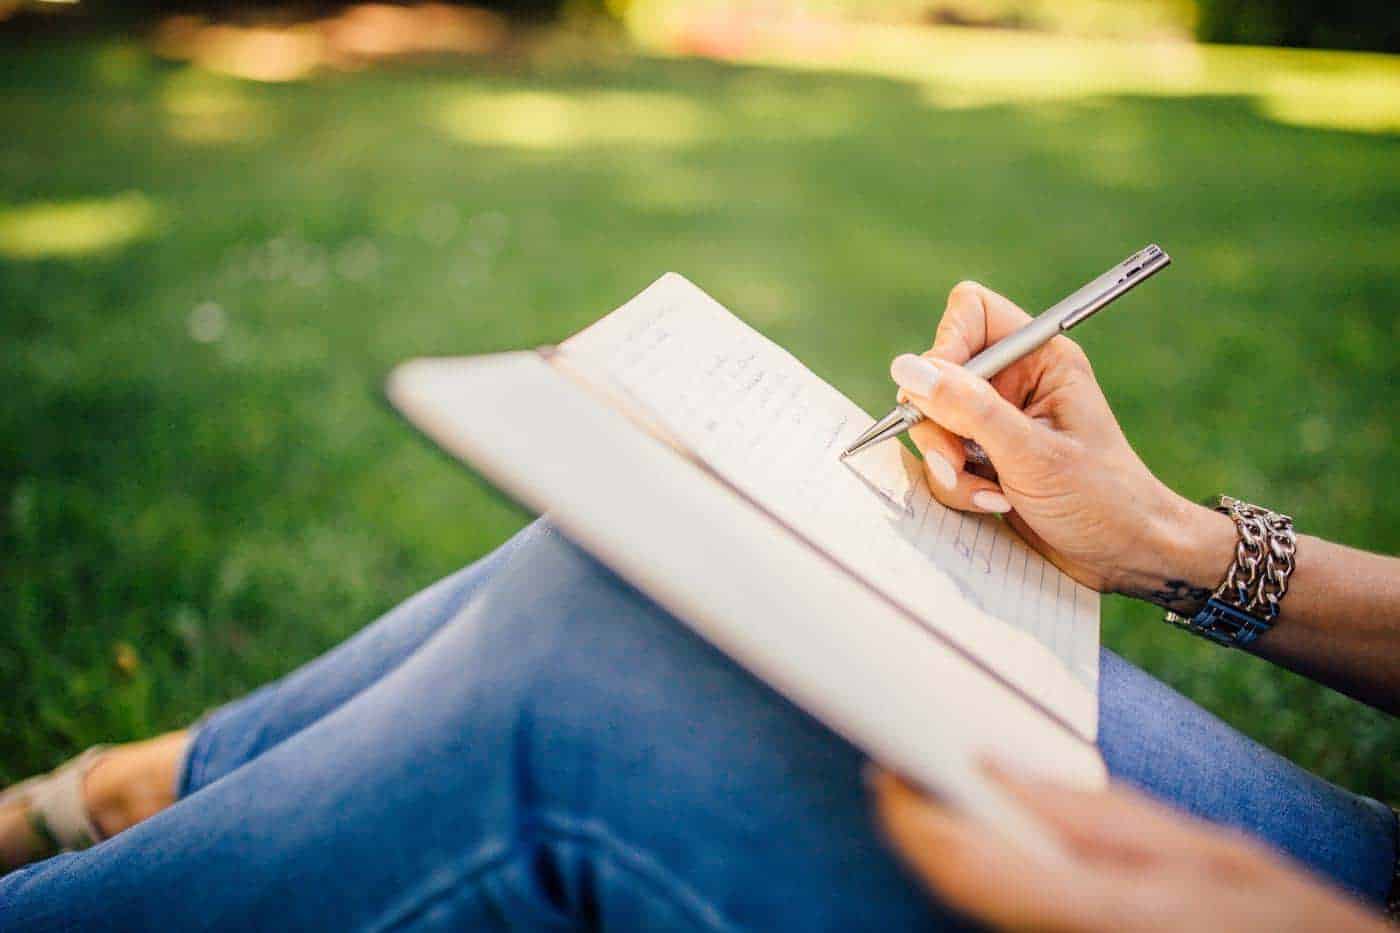 5 Foolproof Writing Tips You’ll Love